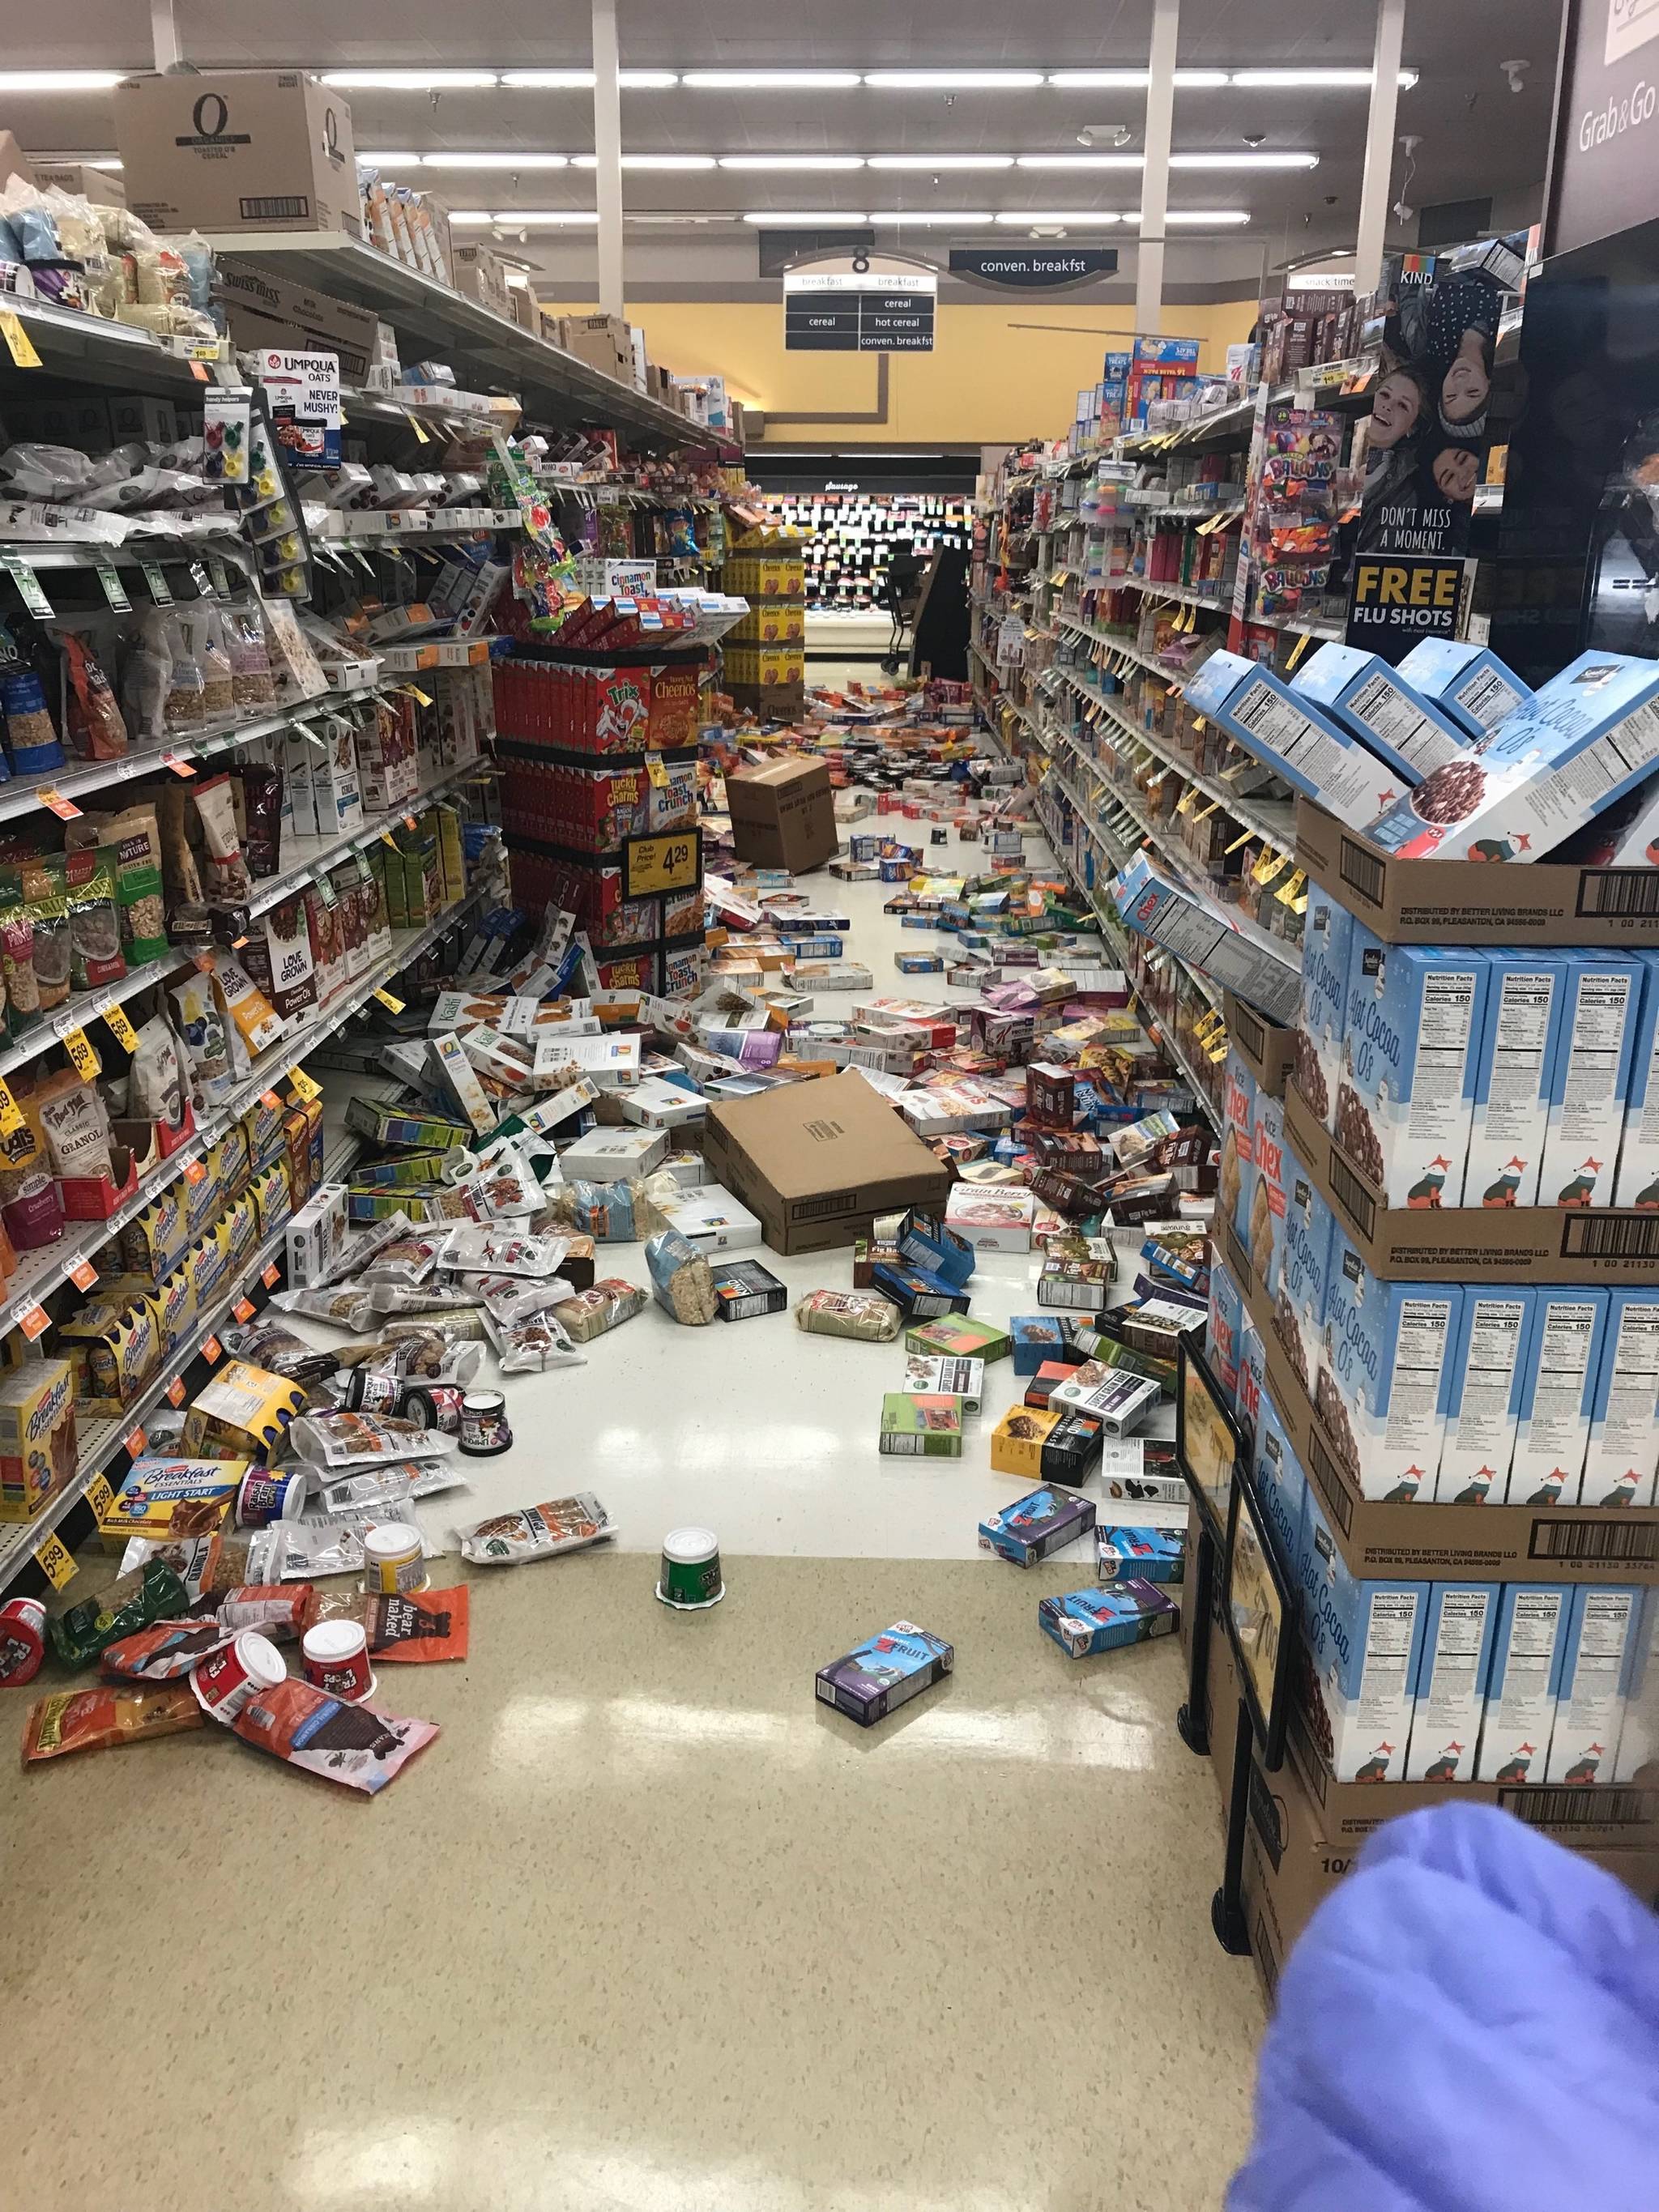 The Safeway in Anchorage at Minnesota and Northern Lights saw its shelves emptied by the earthquake. (Contributed Photo - Huey Winston)